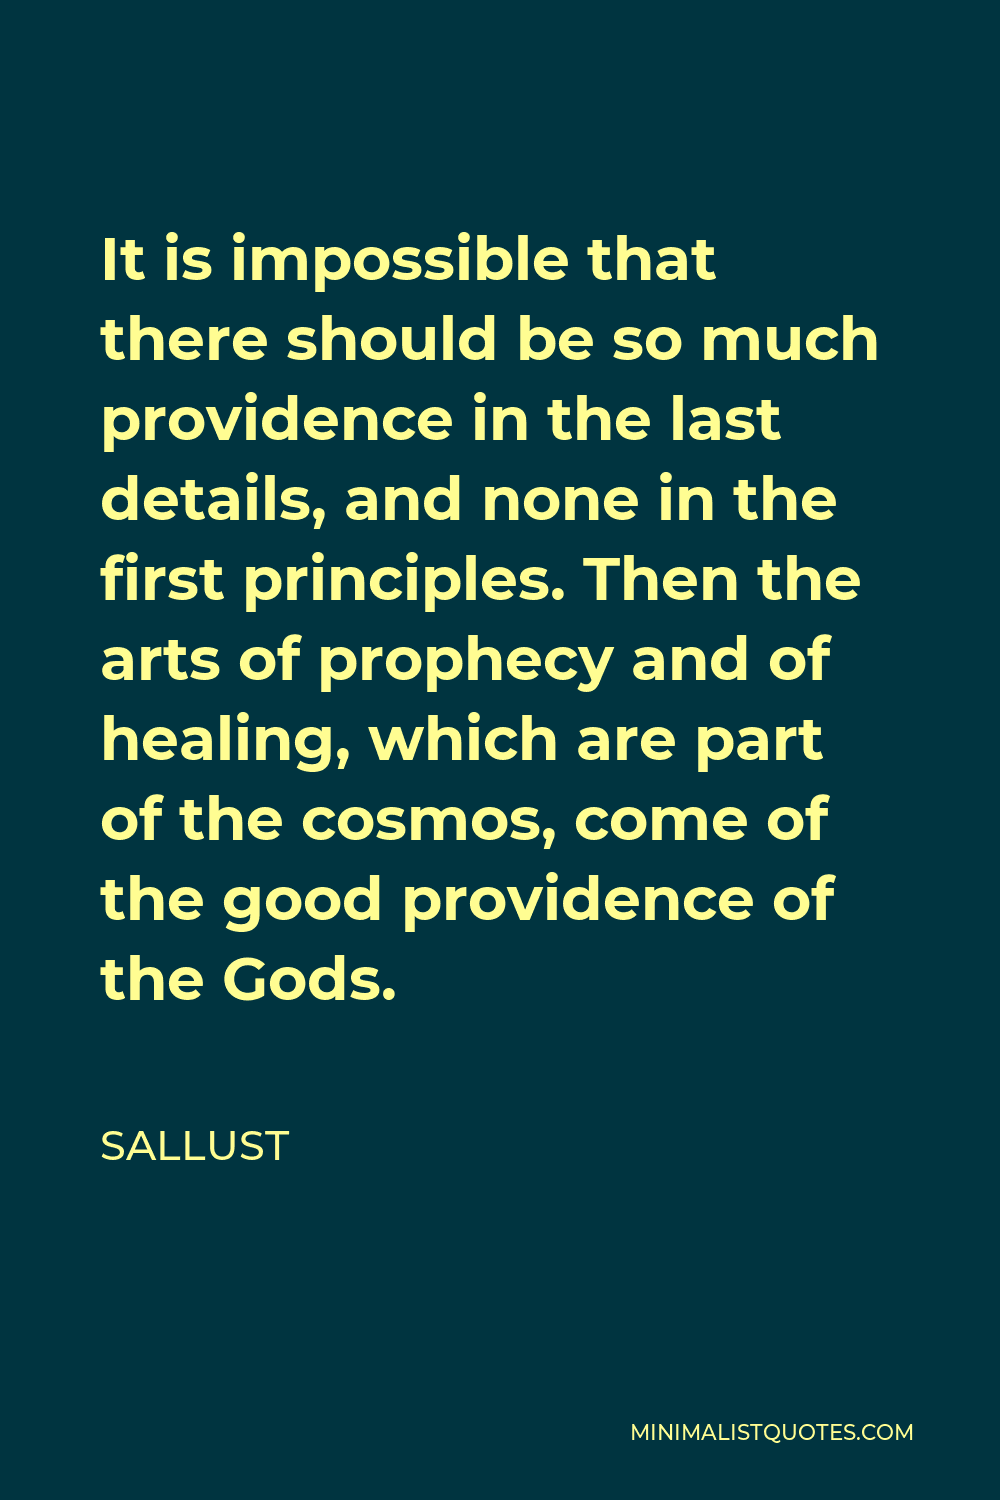 Sallust Quote - It is impossible that there should be so much providence in the last details, and none in the first principles. Then the arts of prophecy and of healing, which are part of the cosmos, come of the good providence of the Gods.